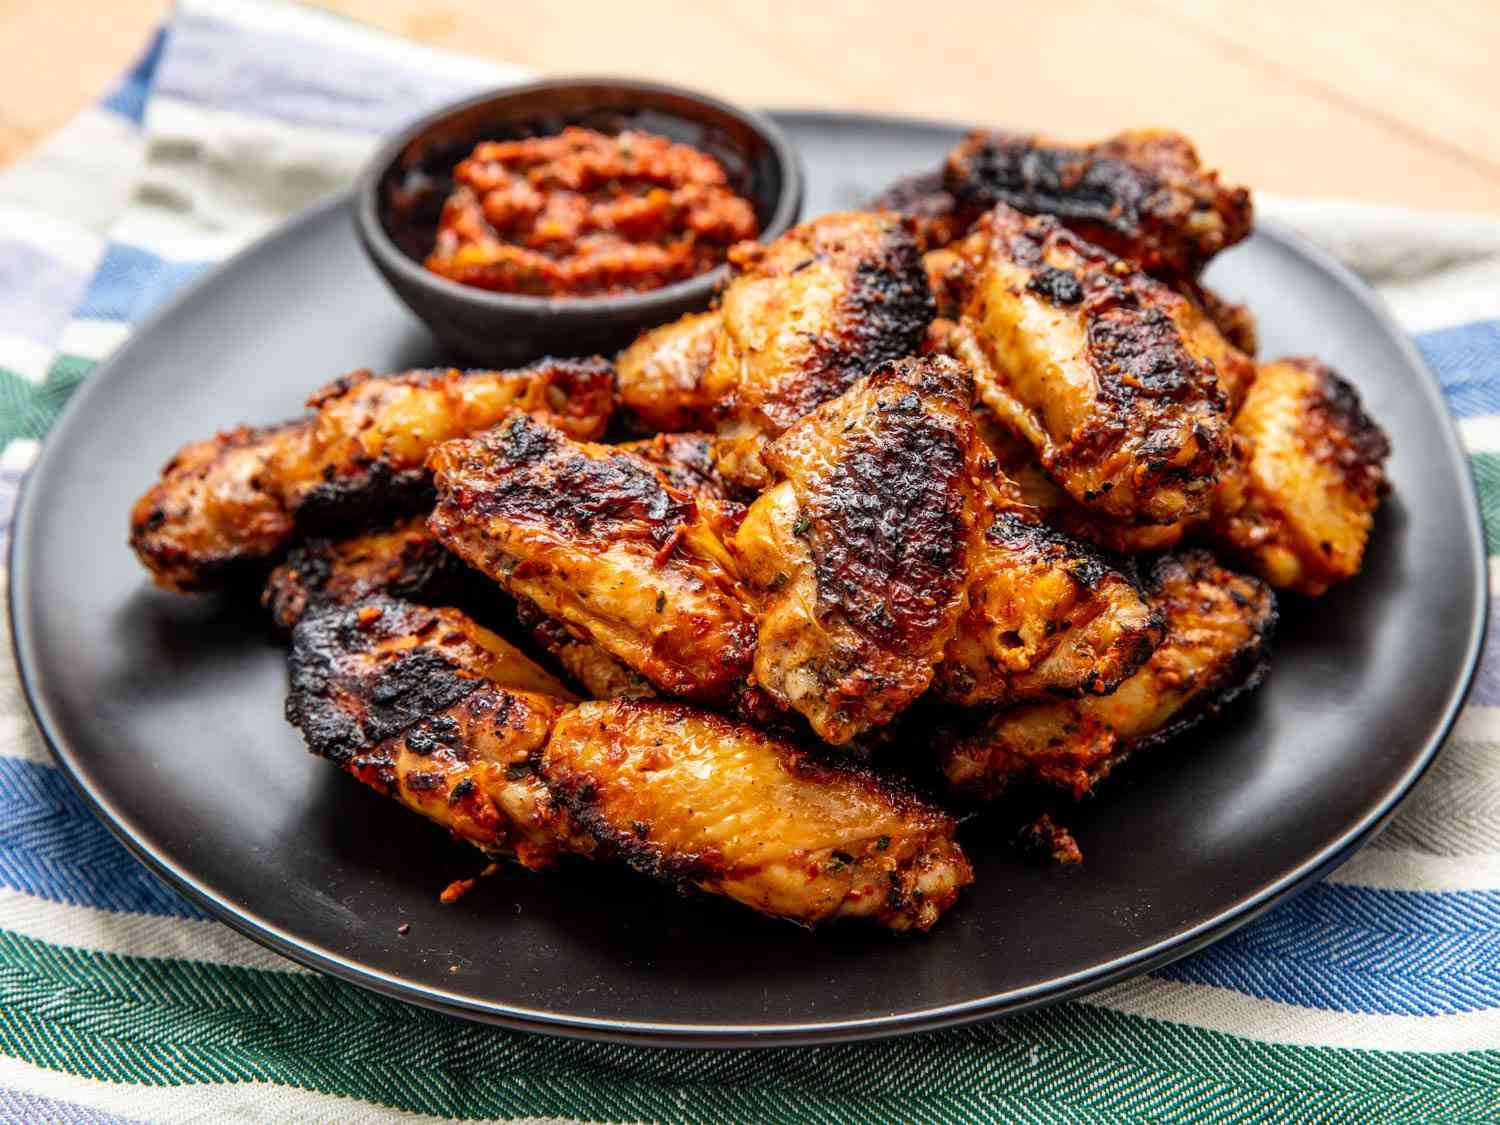 18 Super Bowl Wing Recipes to Make Your Game Day Fly